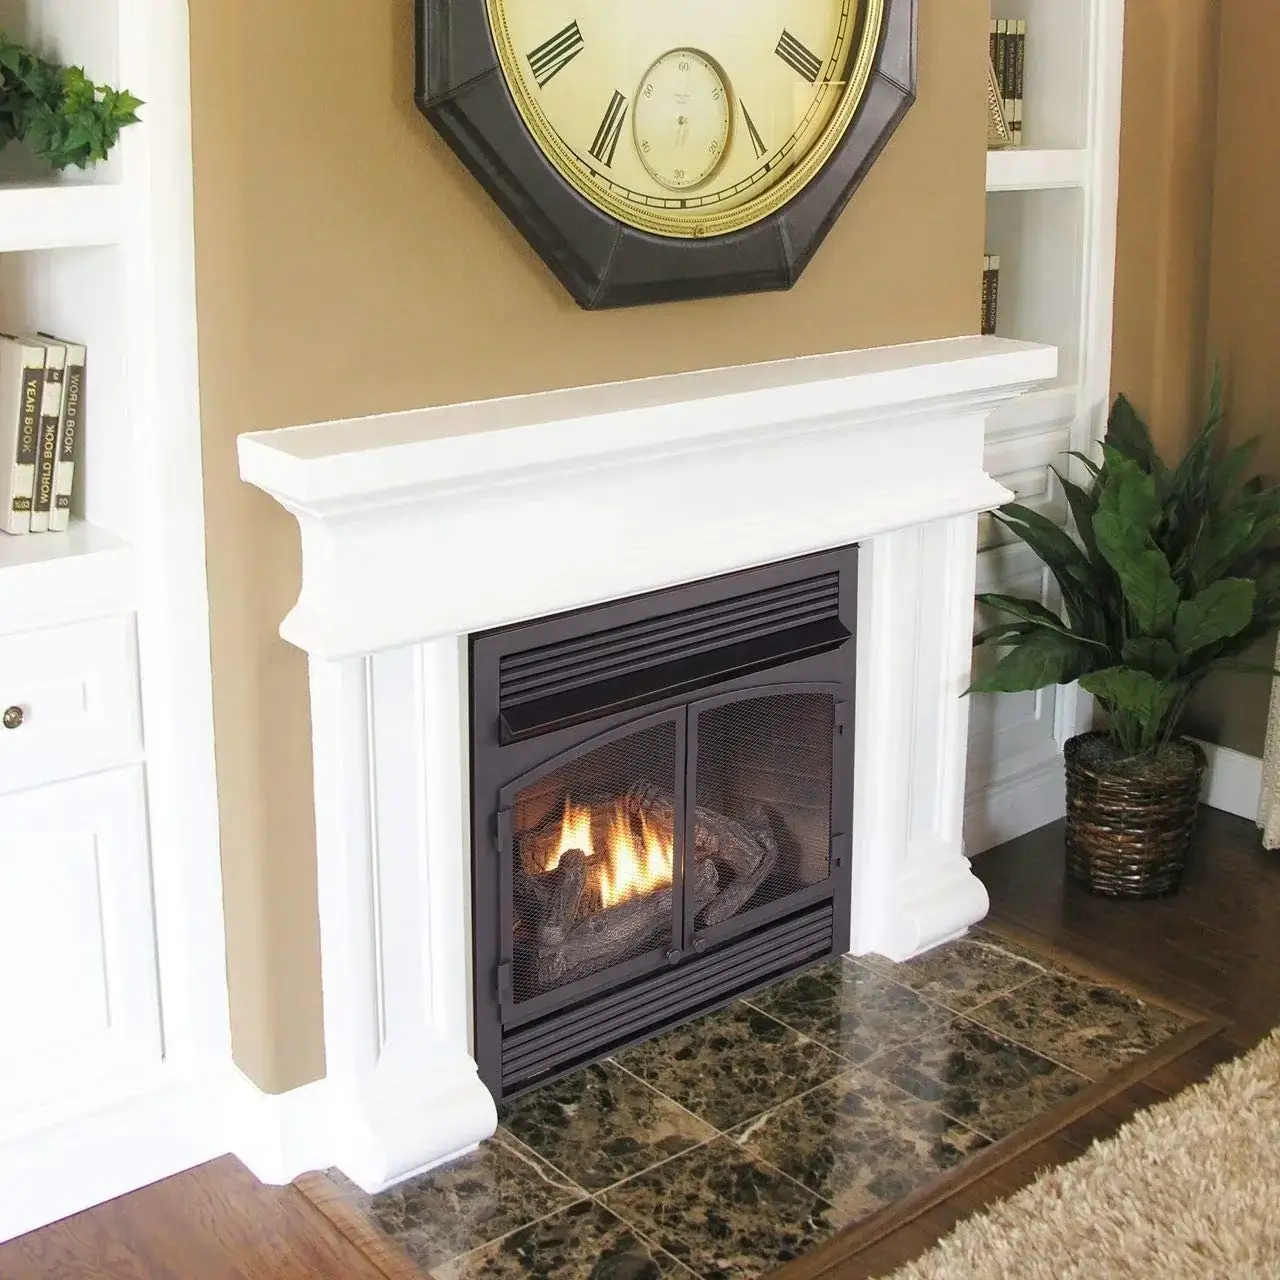 Ventless Fireplace Definitive Guide cover Image